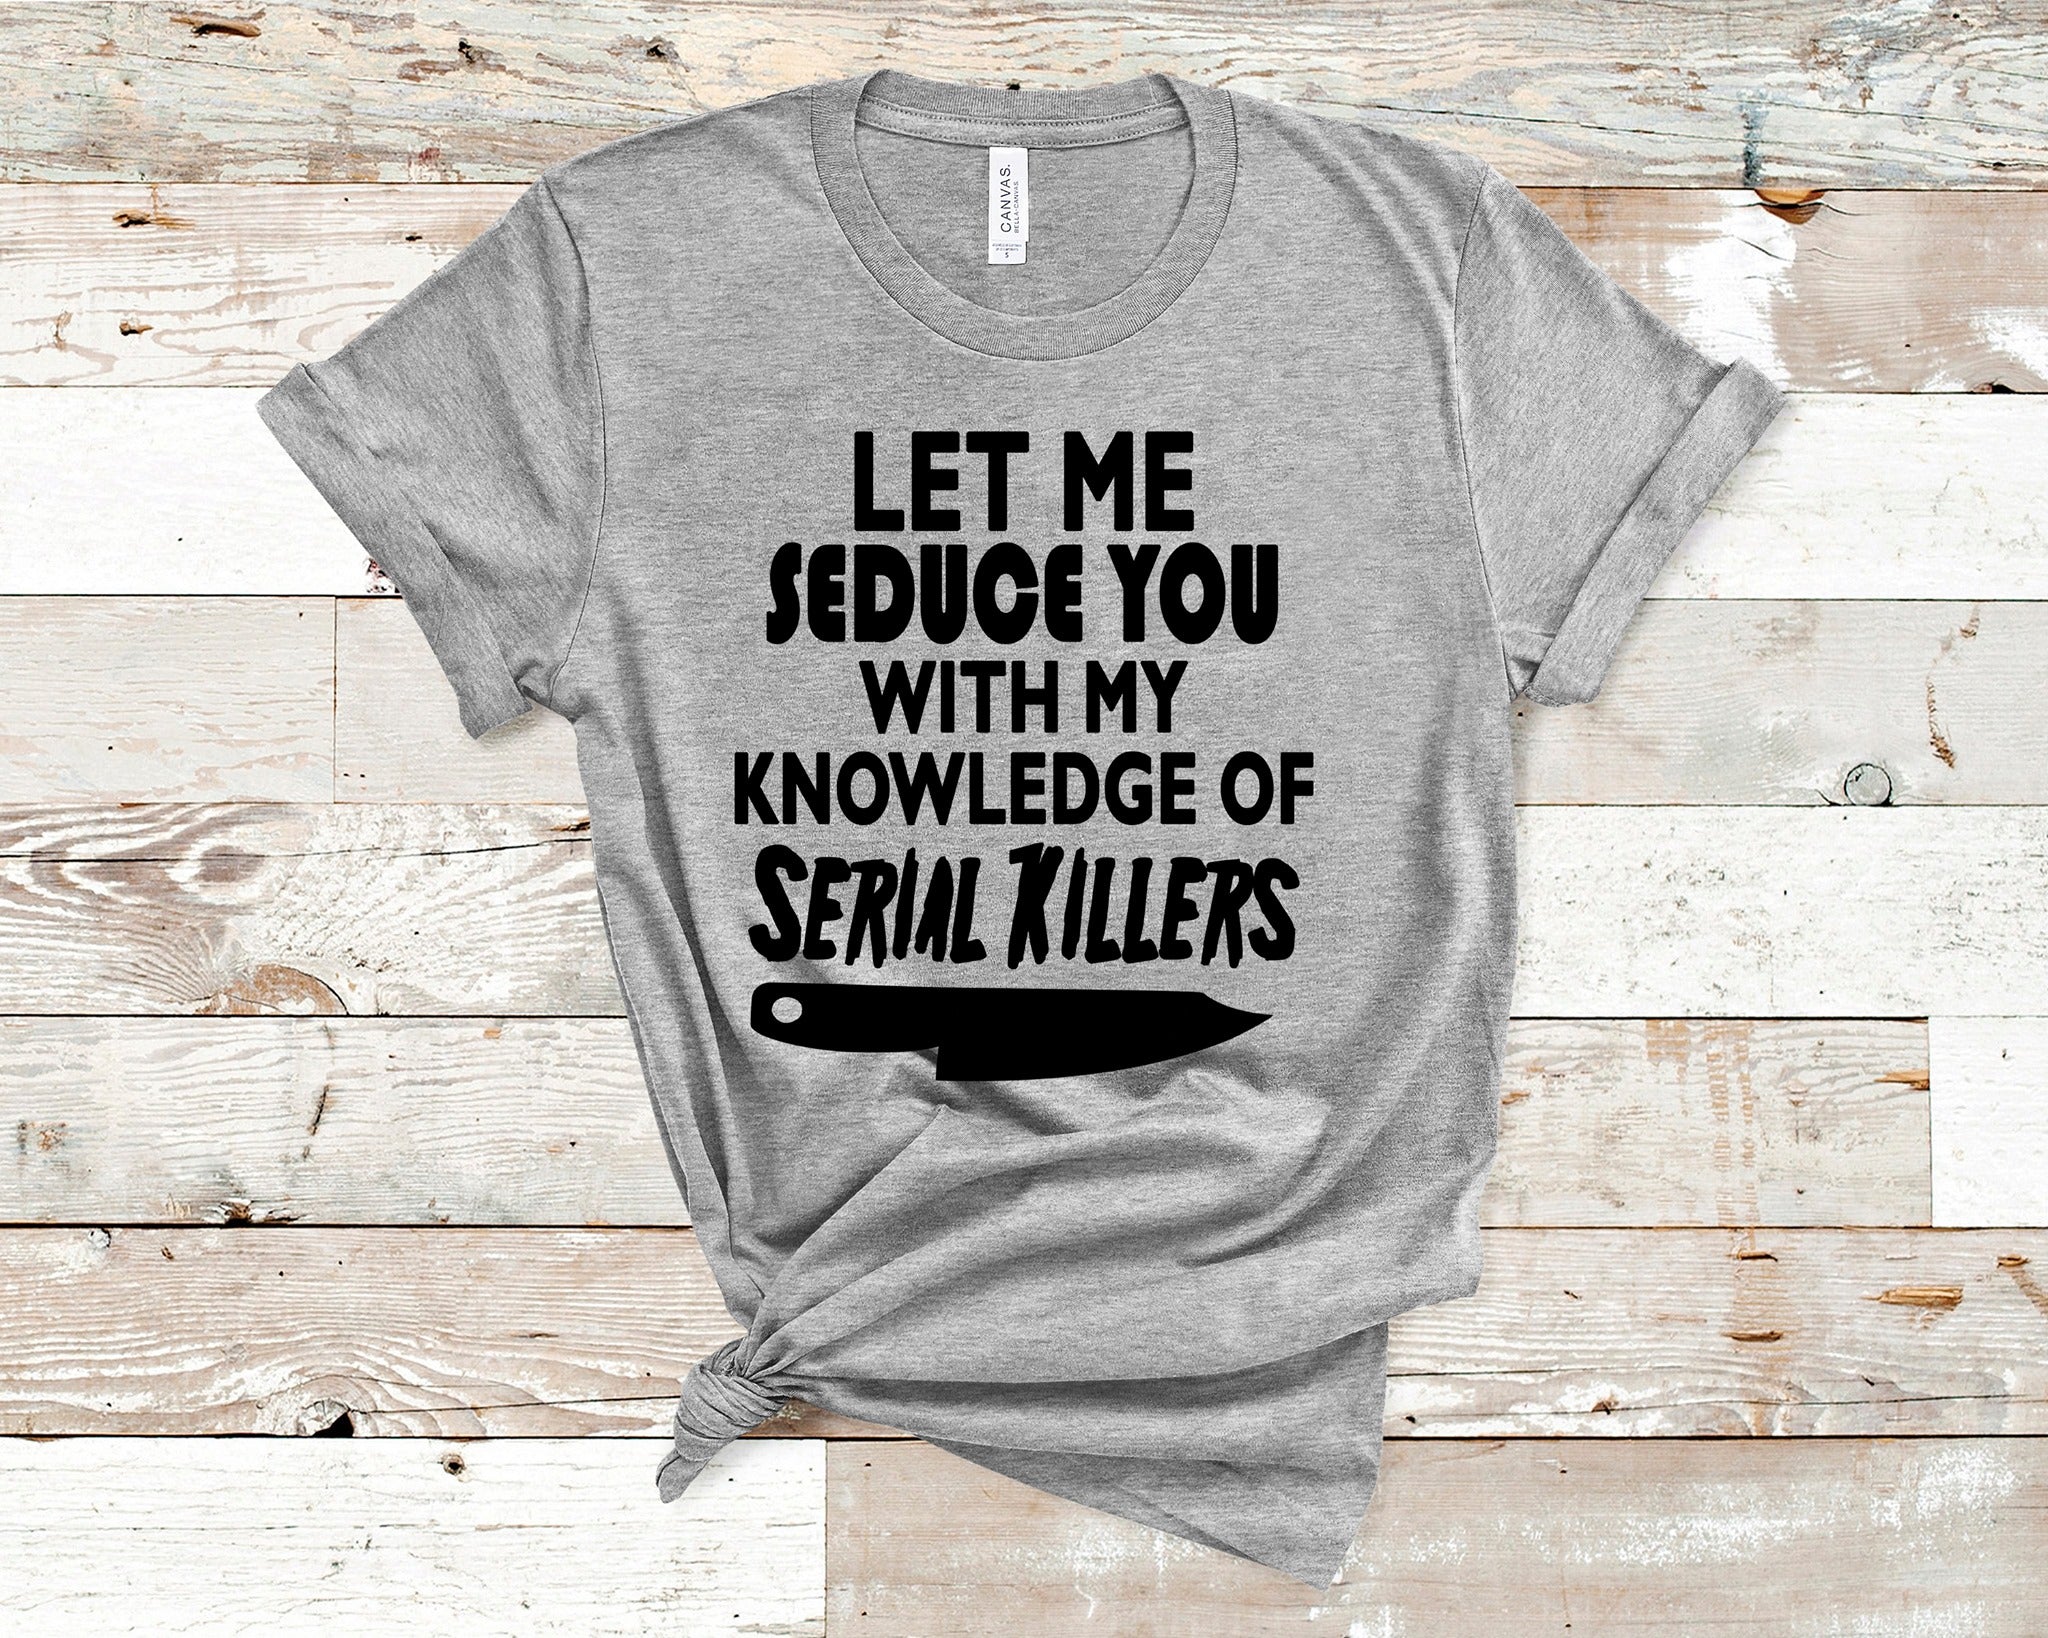 Let Me Seduce You with My Knowledge of Serial Killers T-Shirt (Made to Order)